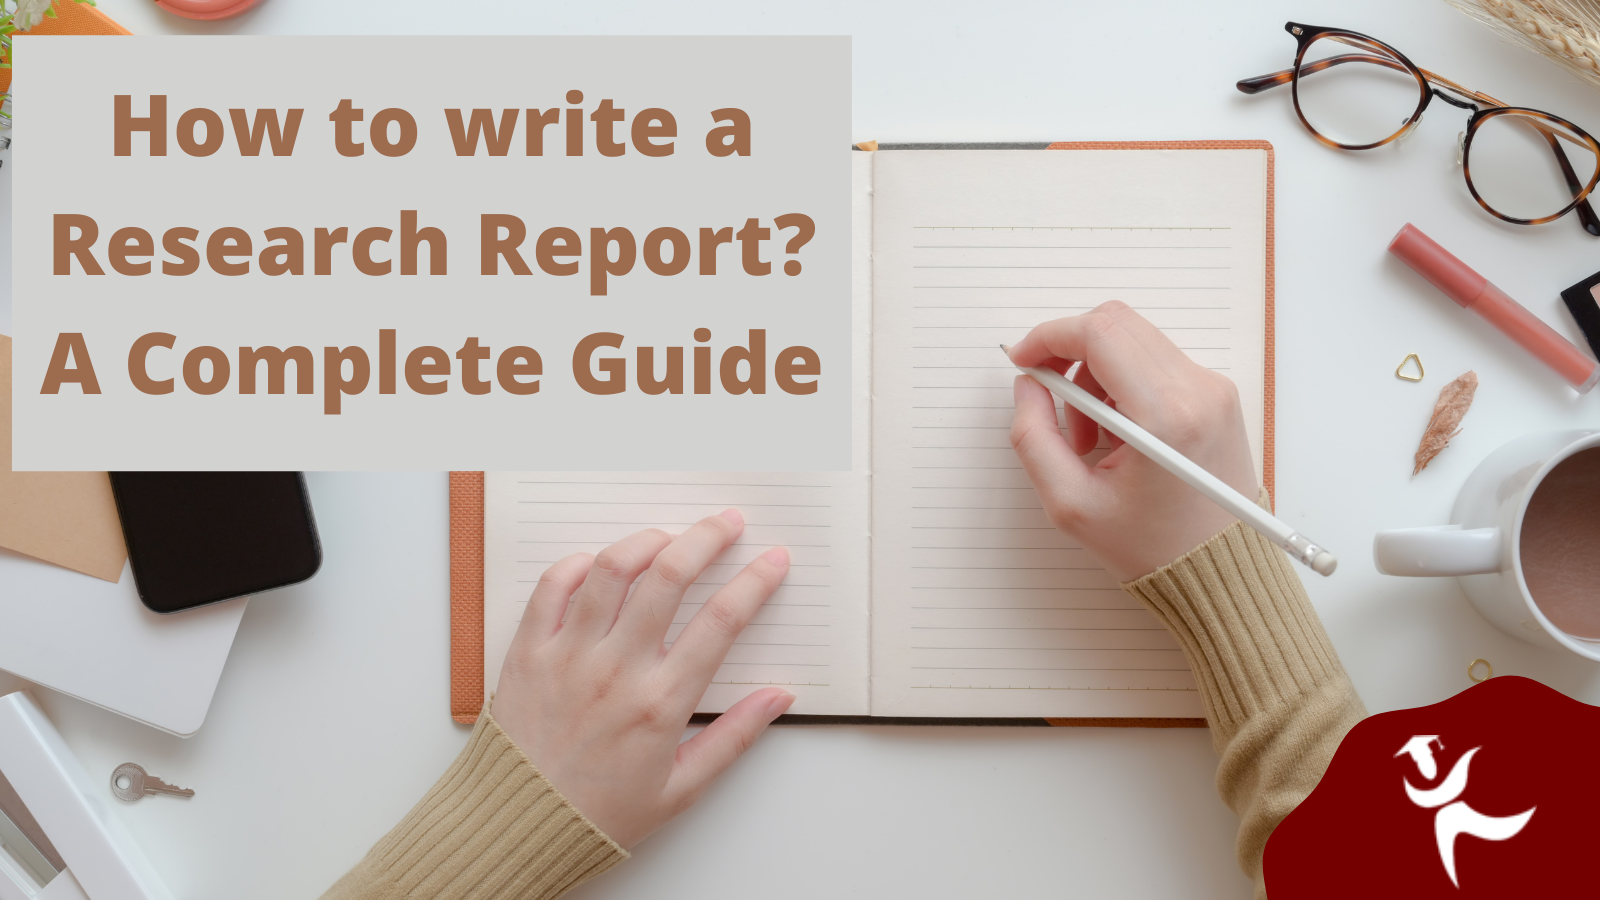 How To Write A Research Report: A Beginners Guide 